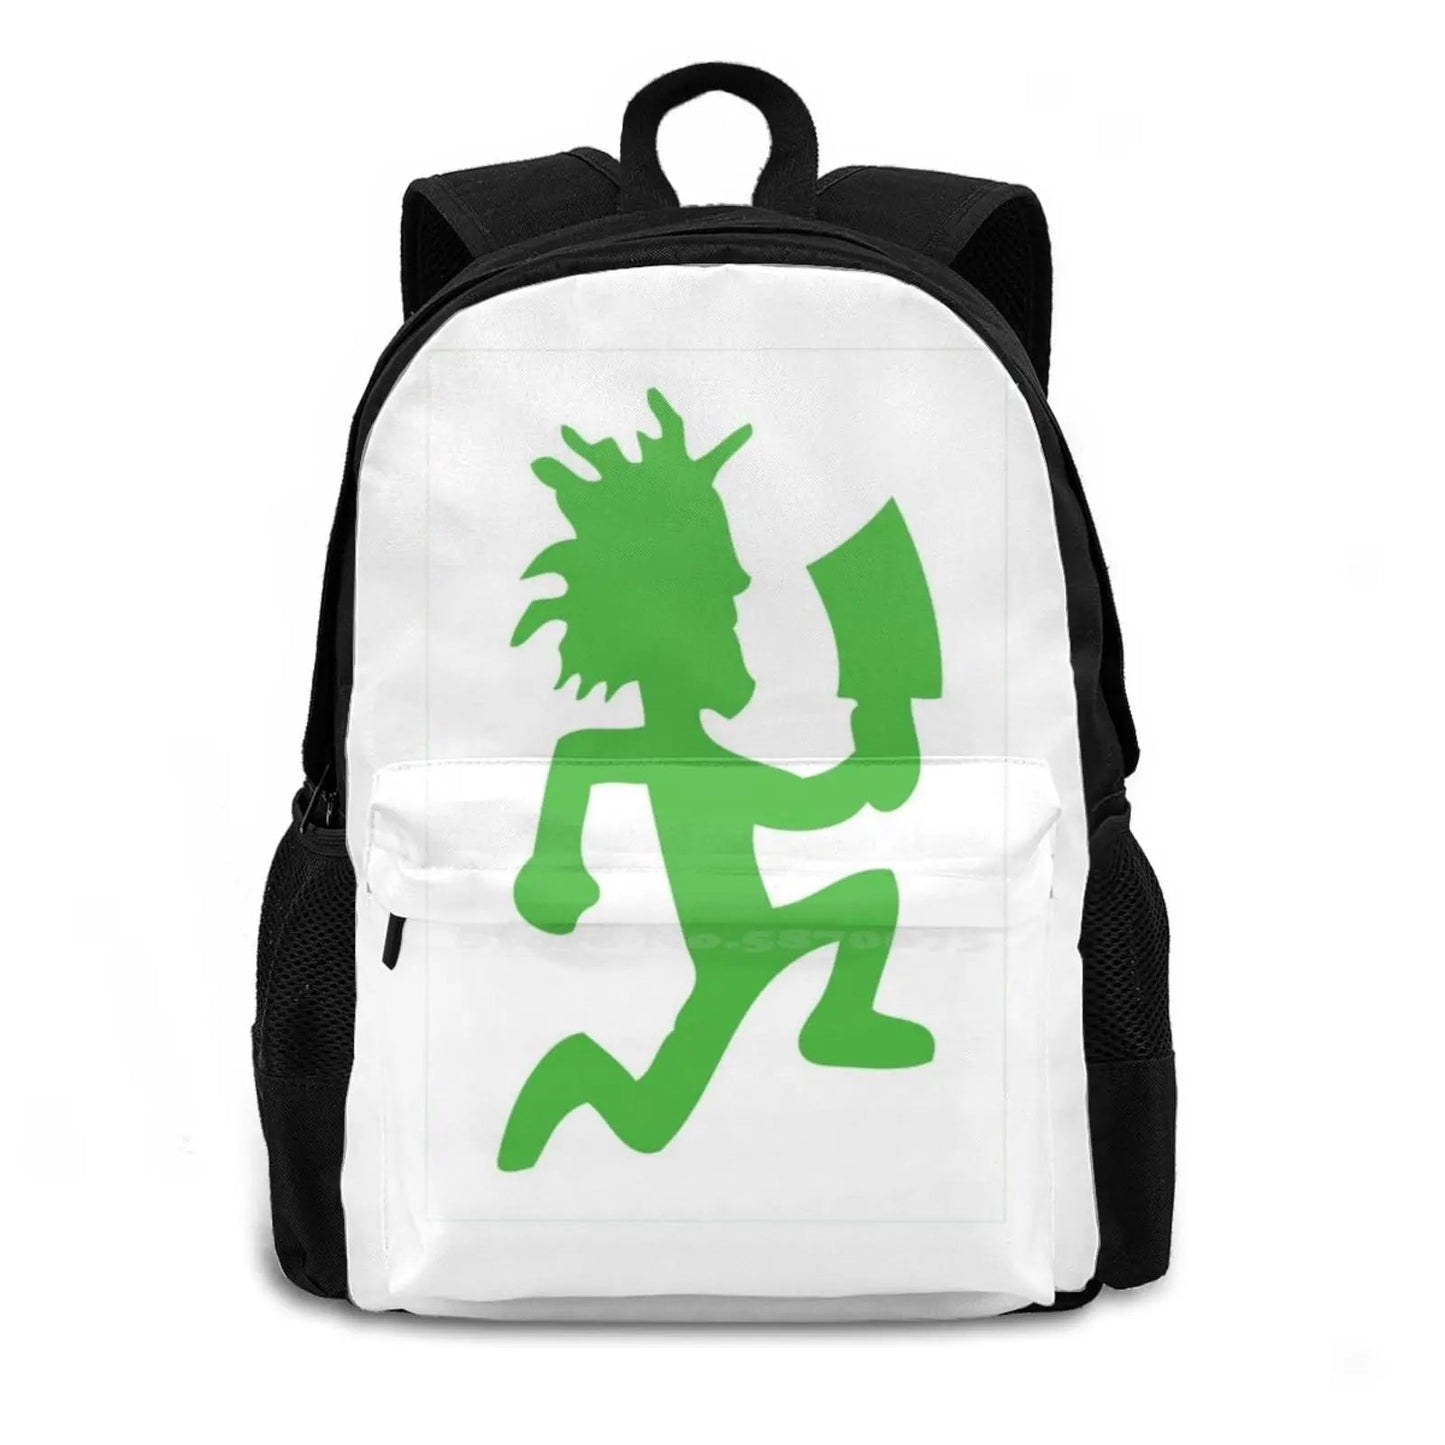 Juggalo ICP Backpack - The Rave Cave